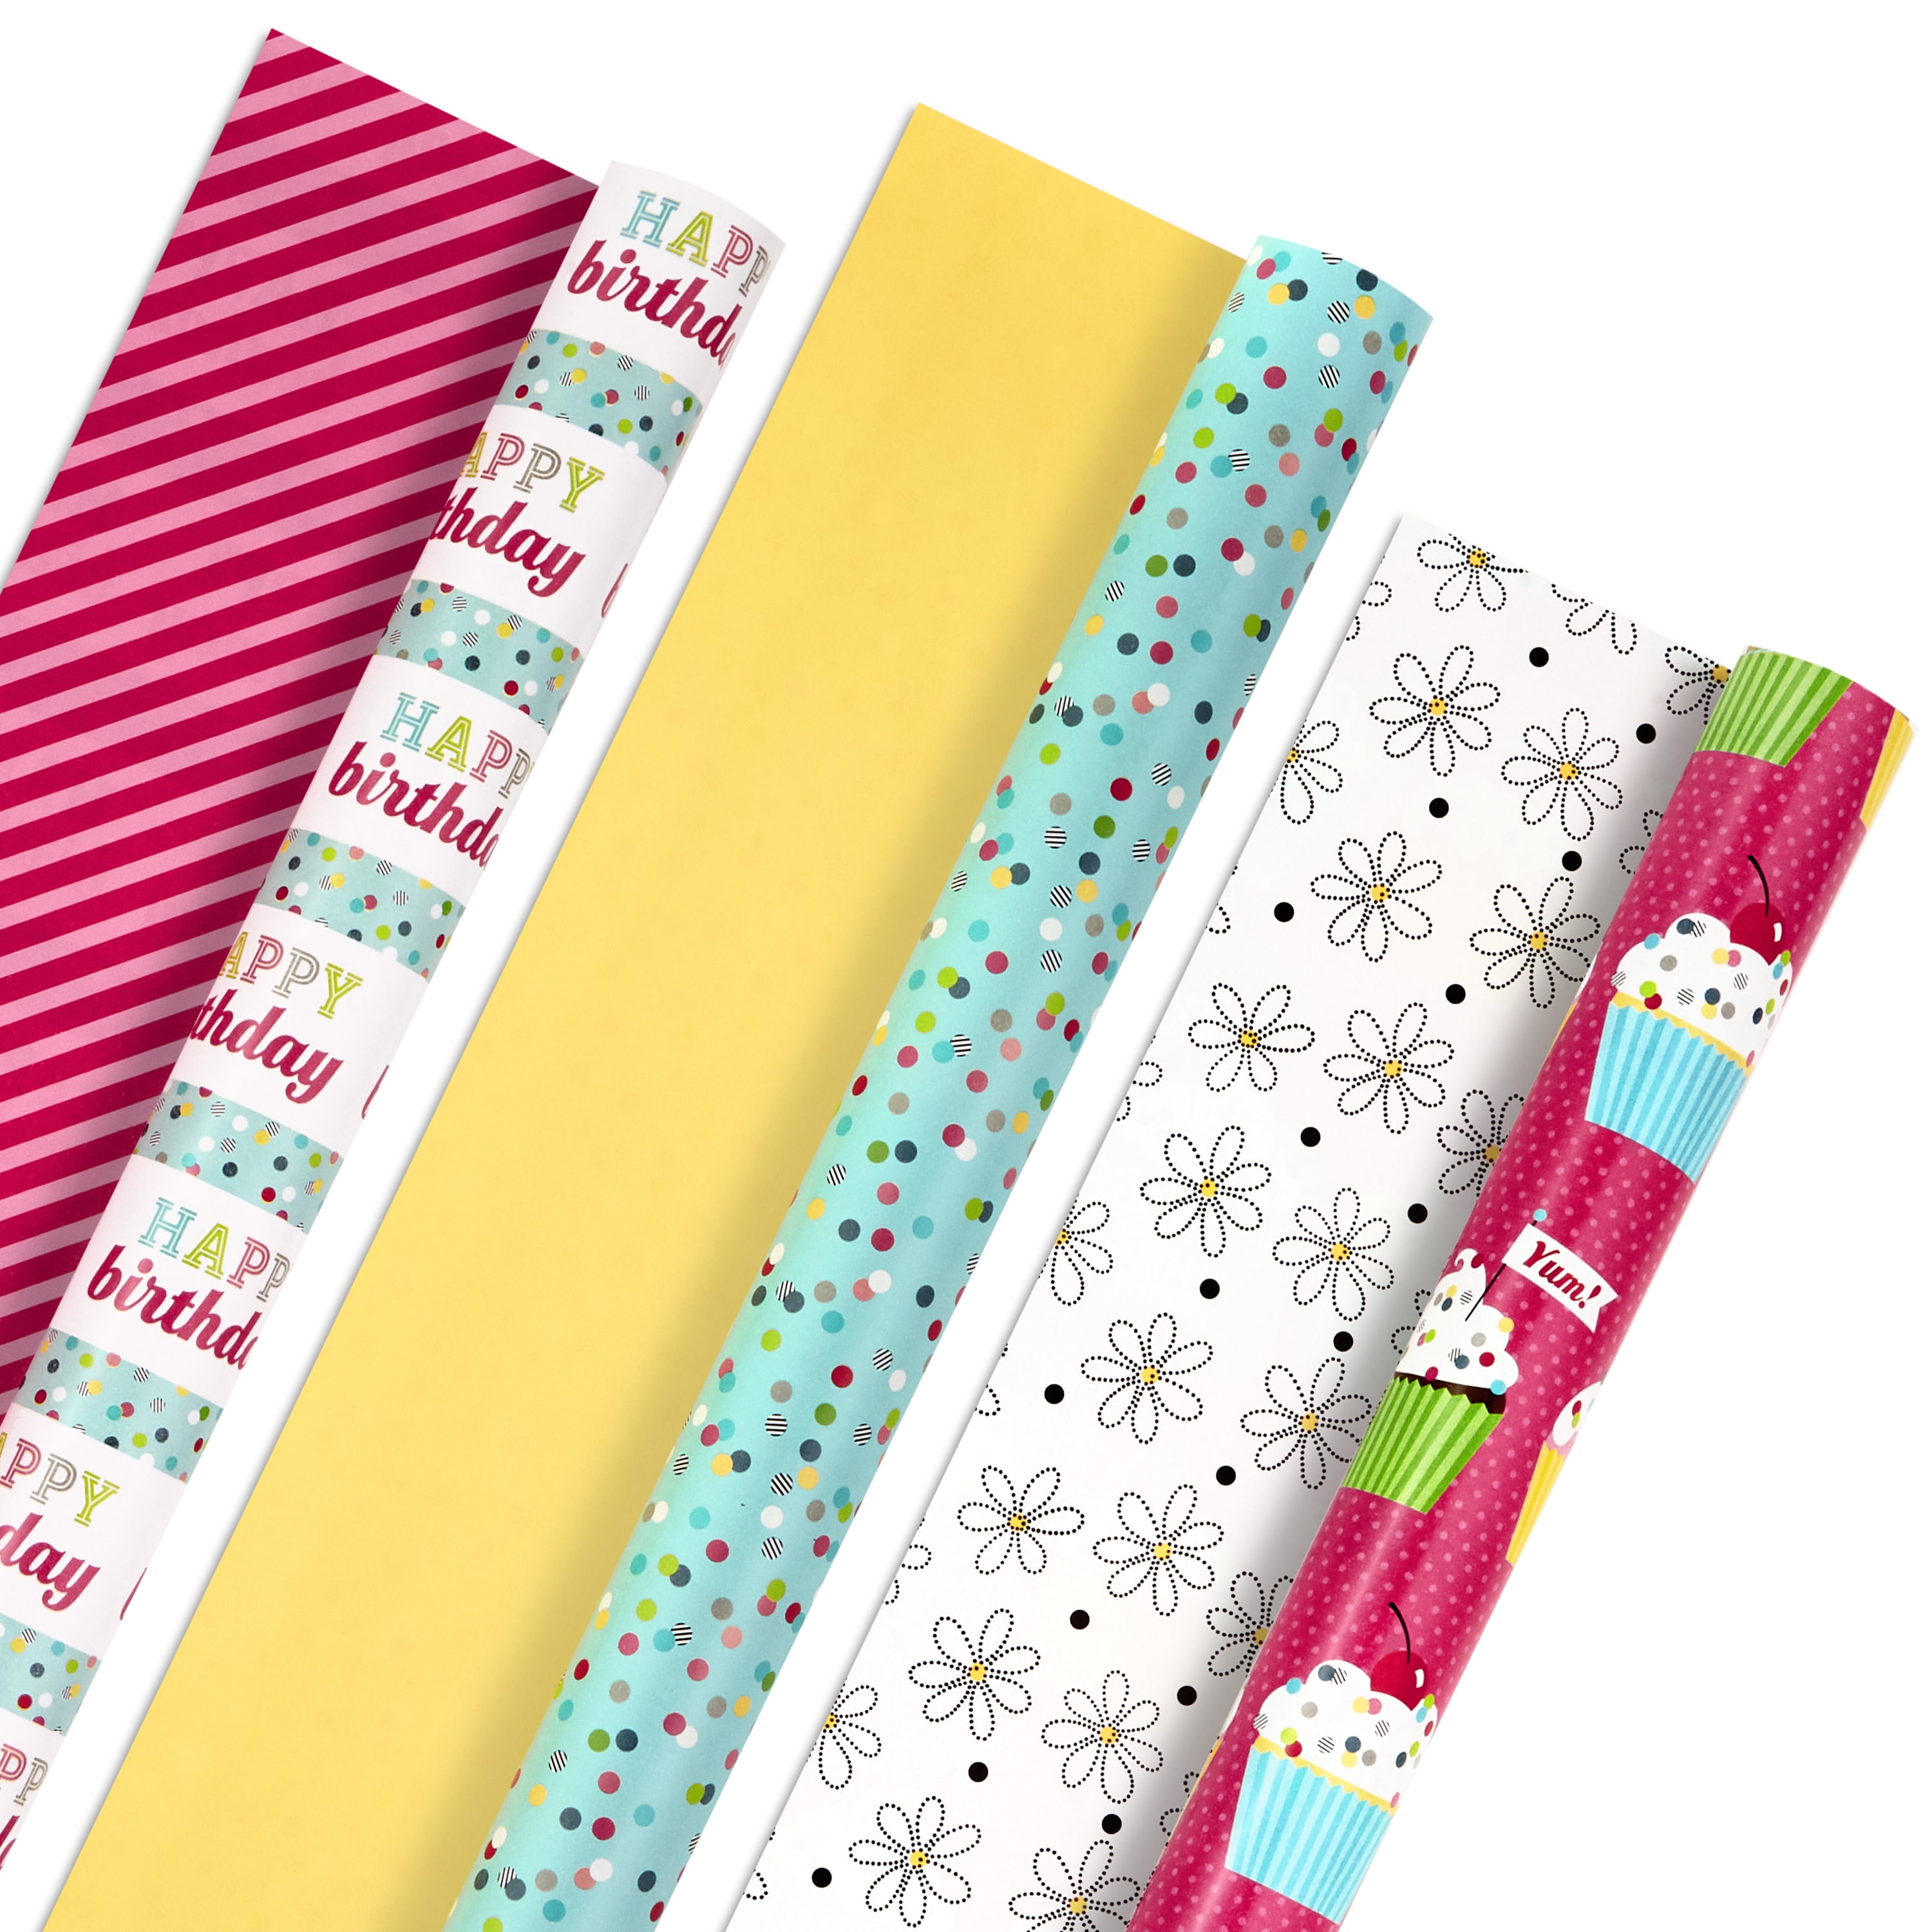 36M GIFT WRAPPING PAPER MULTI COLOURED STRIPS and CELEBRATE/HOORAY,6 X 6M ROLLS 